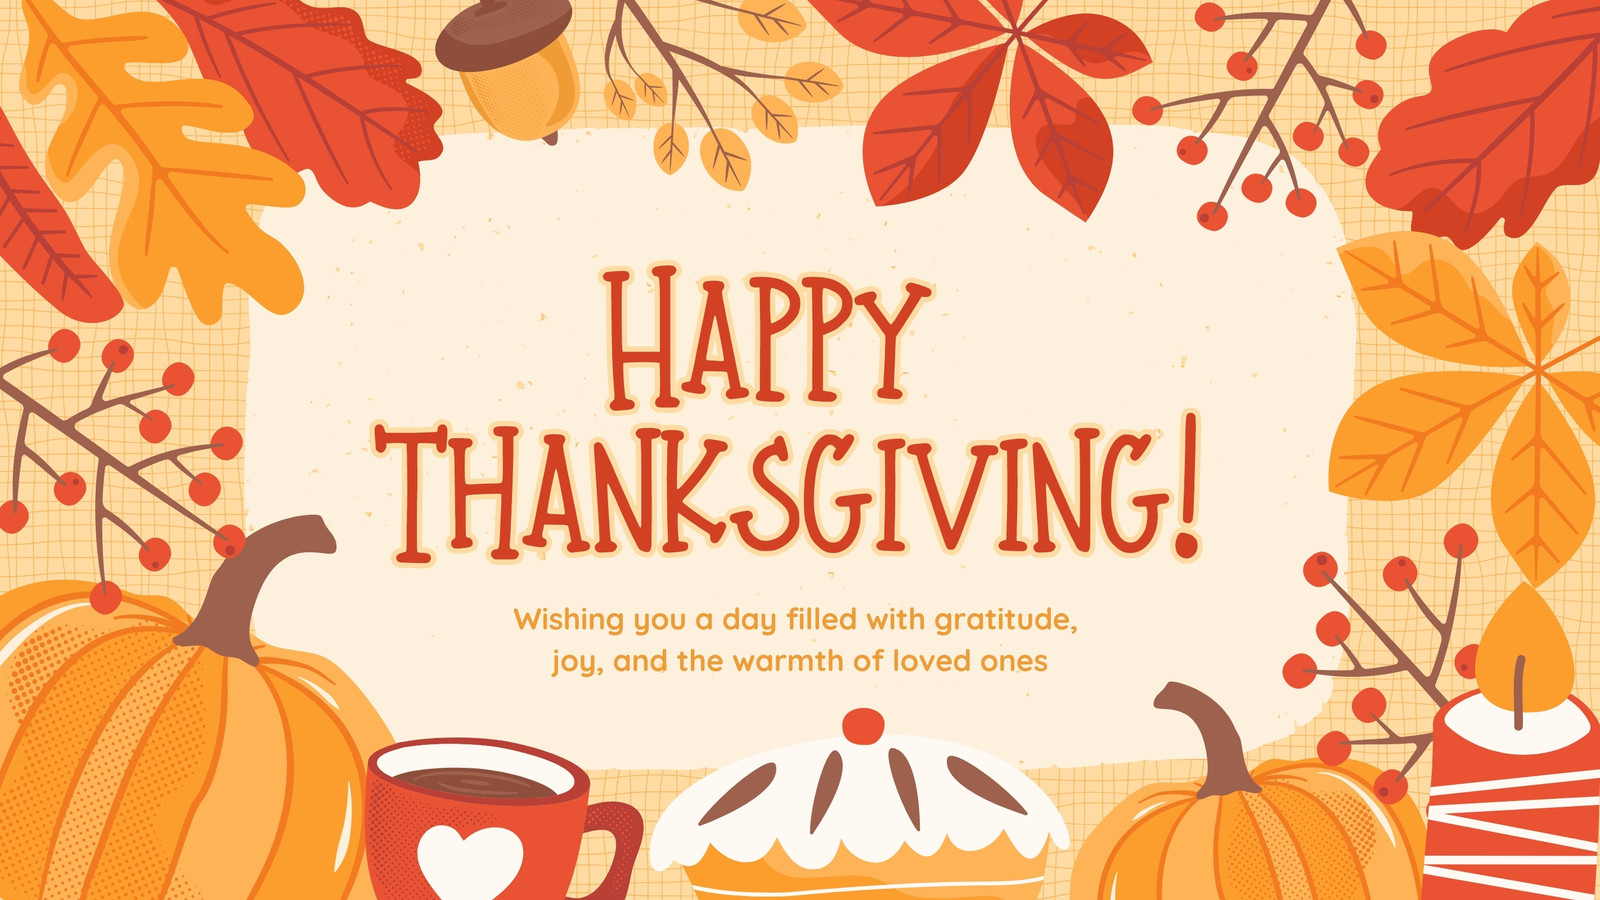 canva-yellow-orange-simple-cute-illustrated-animated-greeting-thanksgiving-video-4JYUs4pYzhA image